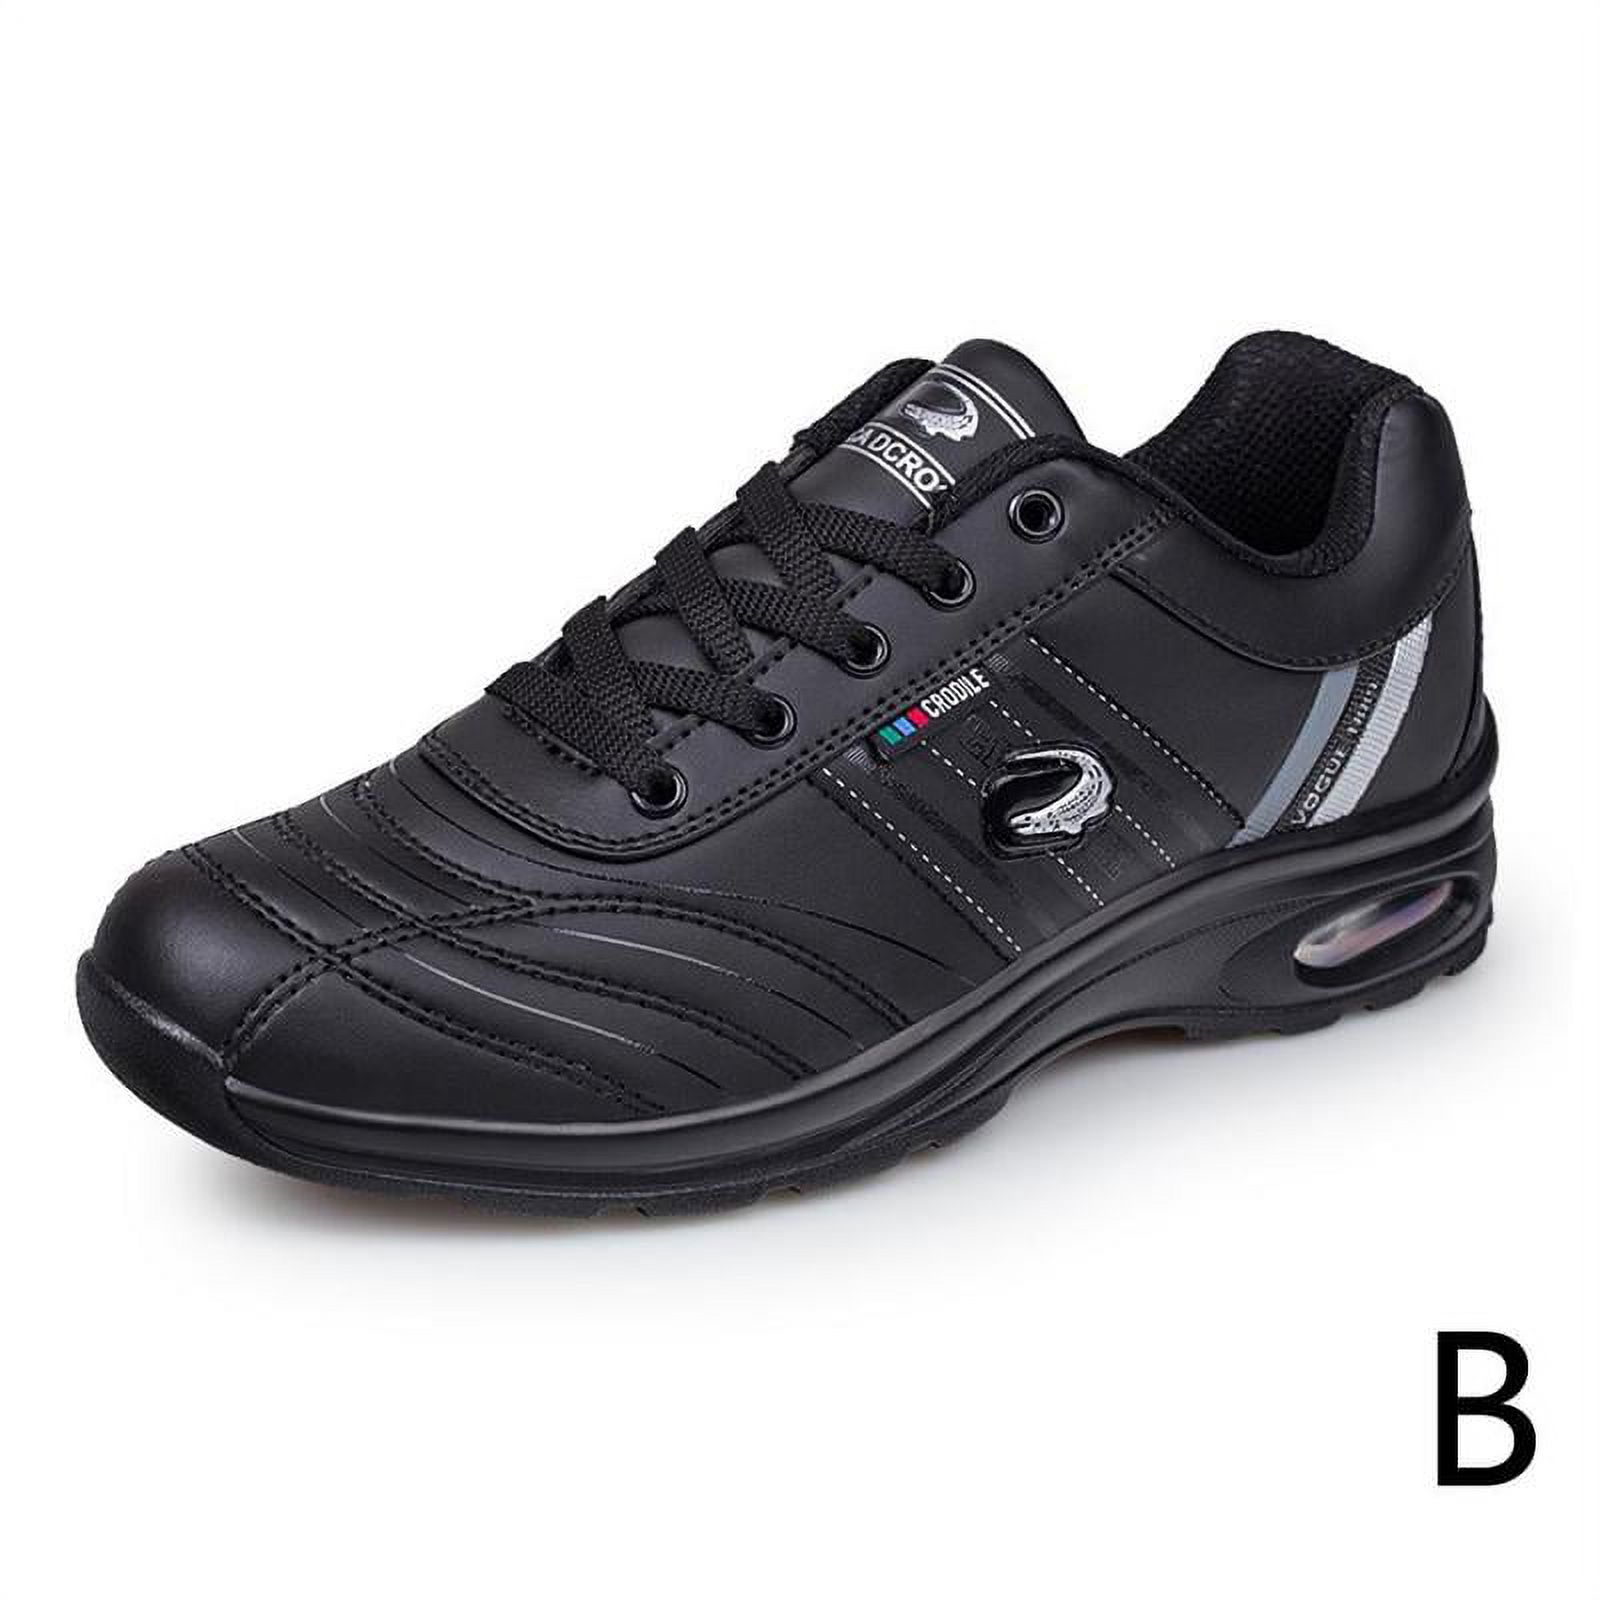 New Men's Golf Shoes Lightweight Men Shoes Golf Waterproof Anti-slip Shoes Golf Shoes Breathable Sports Shoes - image 1 of 9